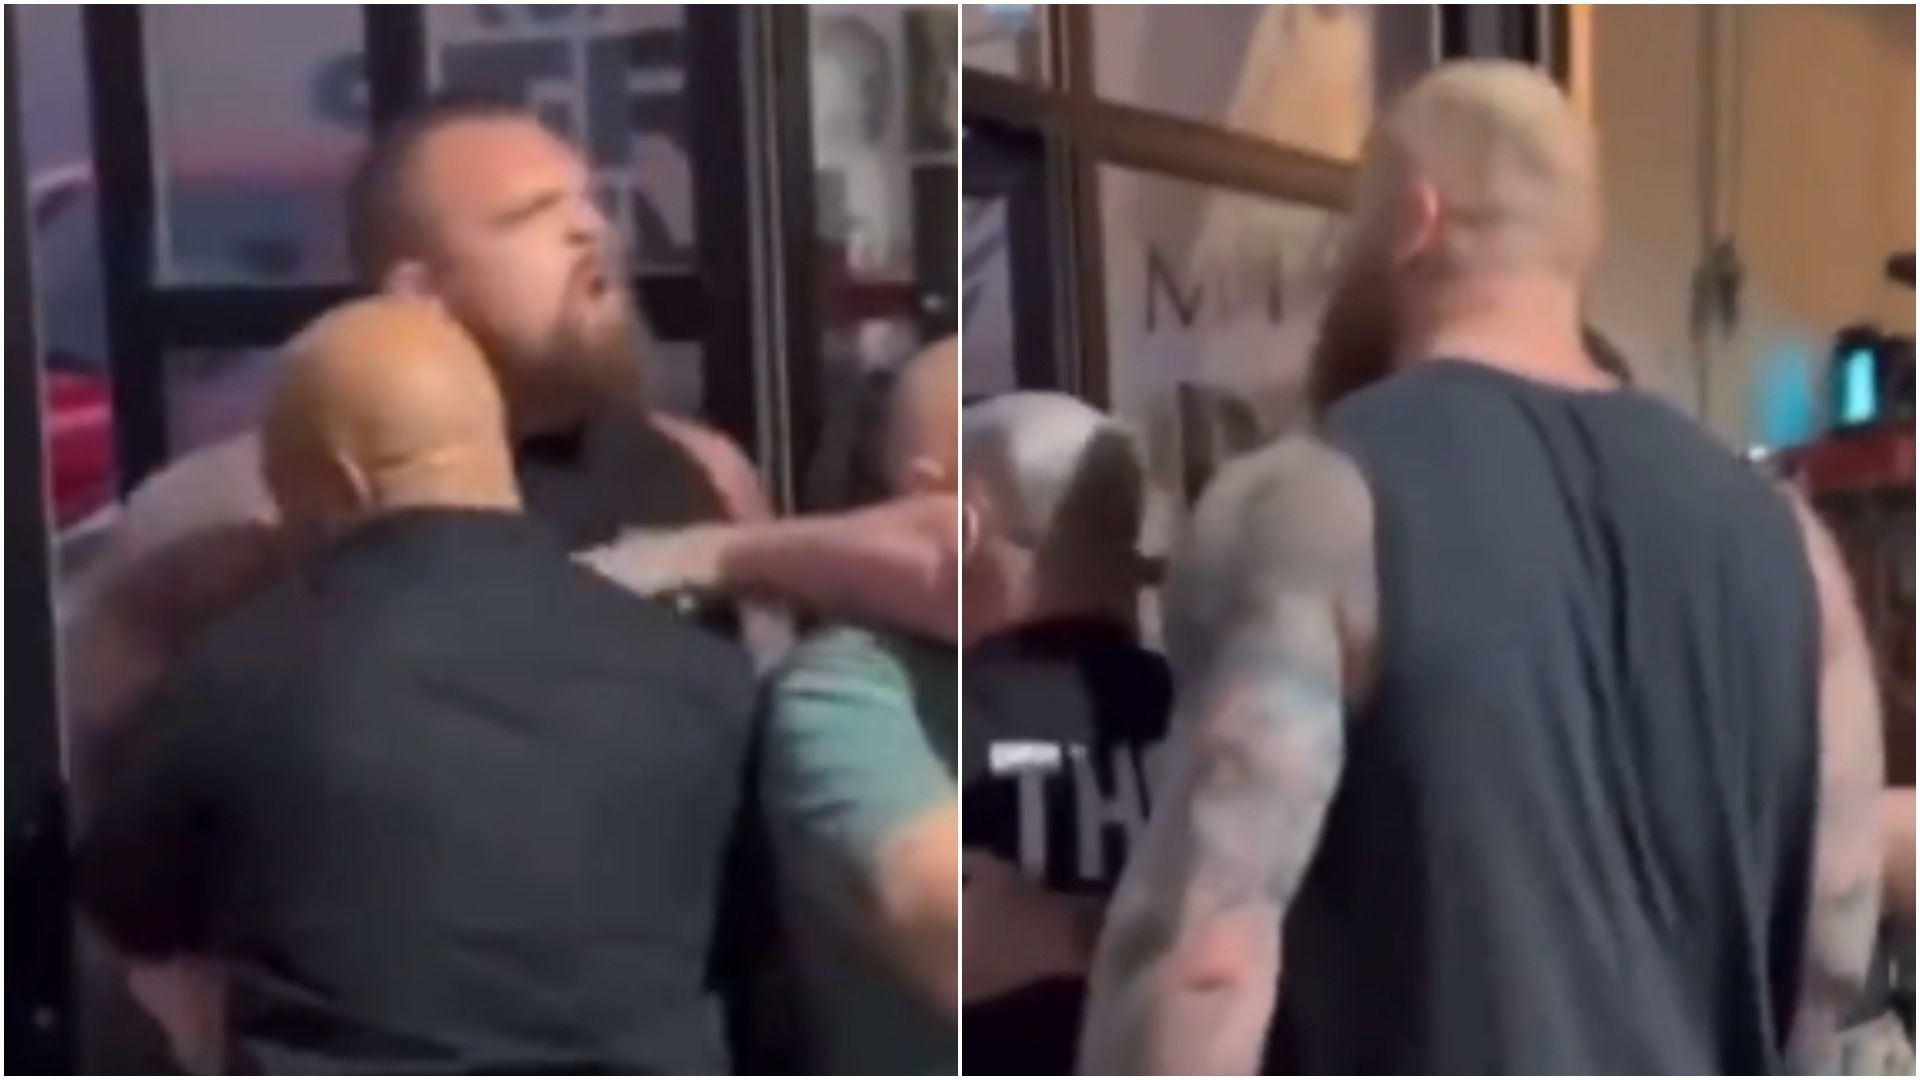 Eddie Hall vs Hafthor Bjornsson Rivals spat at each other during heated clash